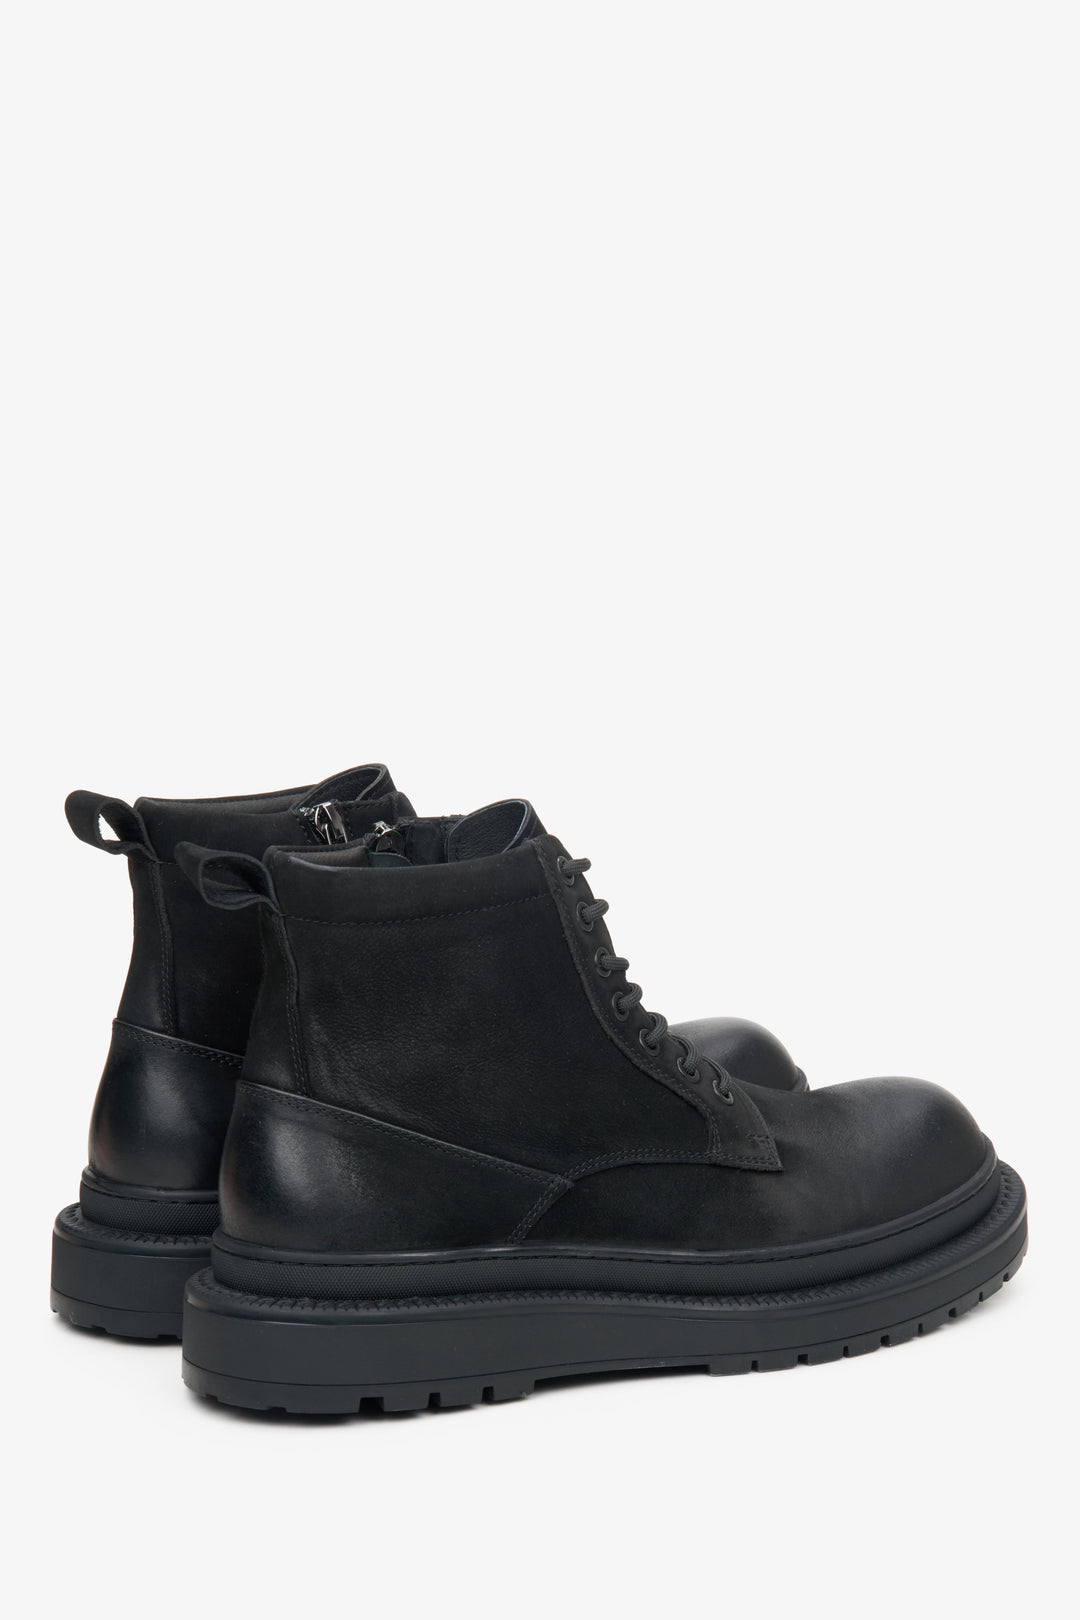 Men's black boots in nubuck by Estro - heel counters and side profile of the shoe.